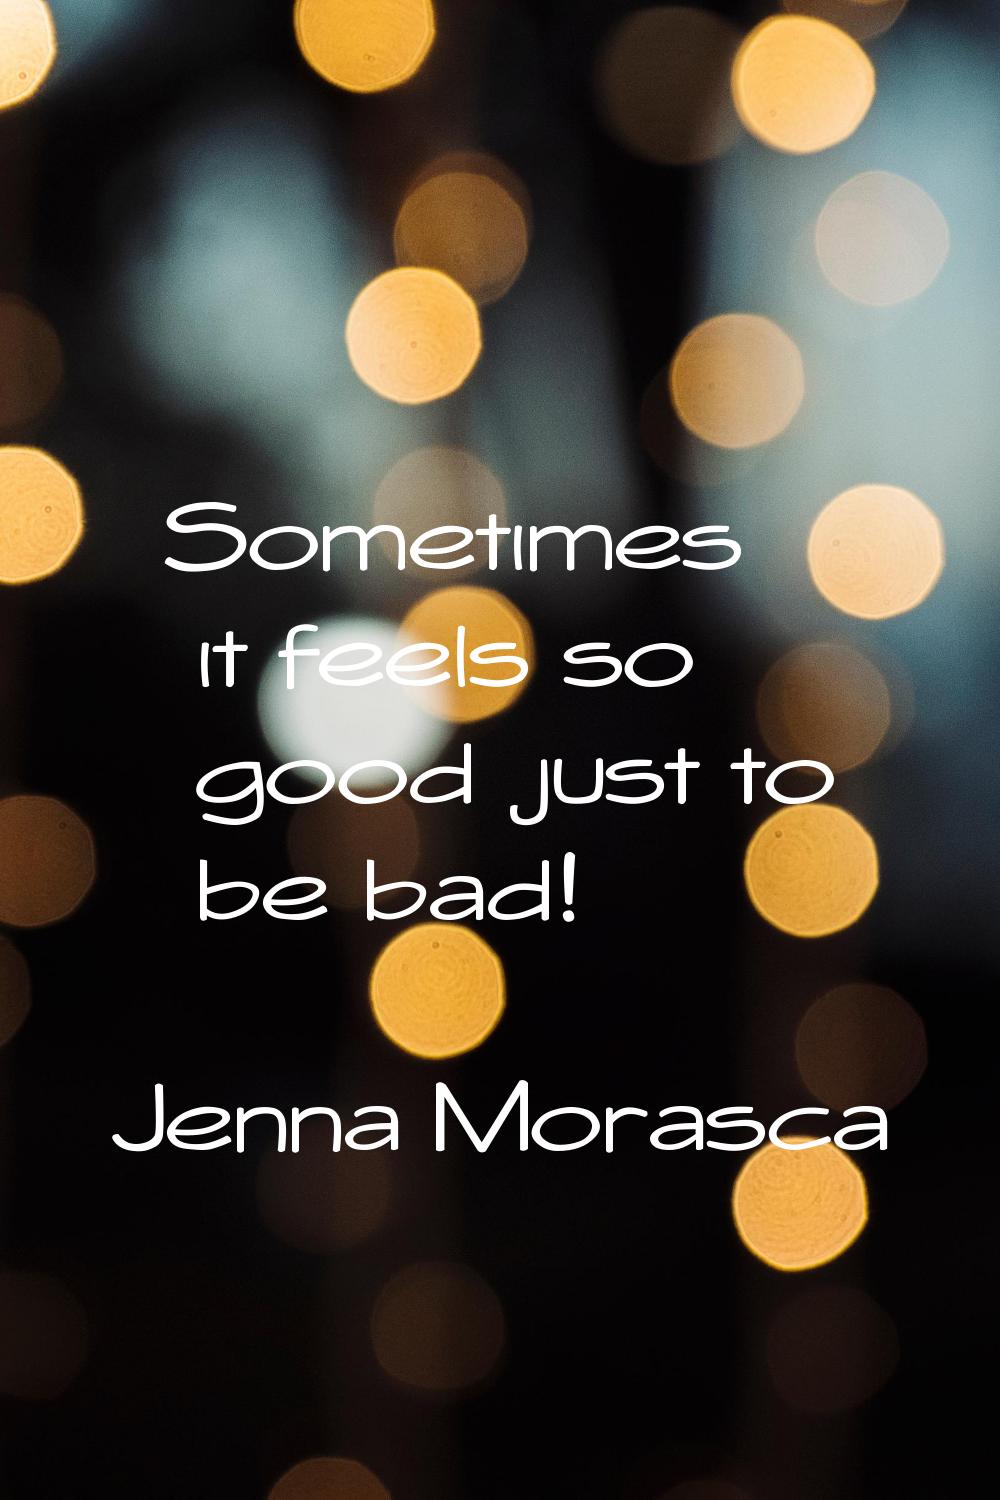 Sometimes it feels so good just to be bad!